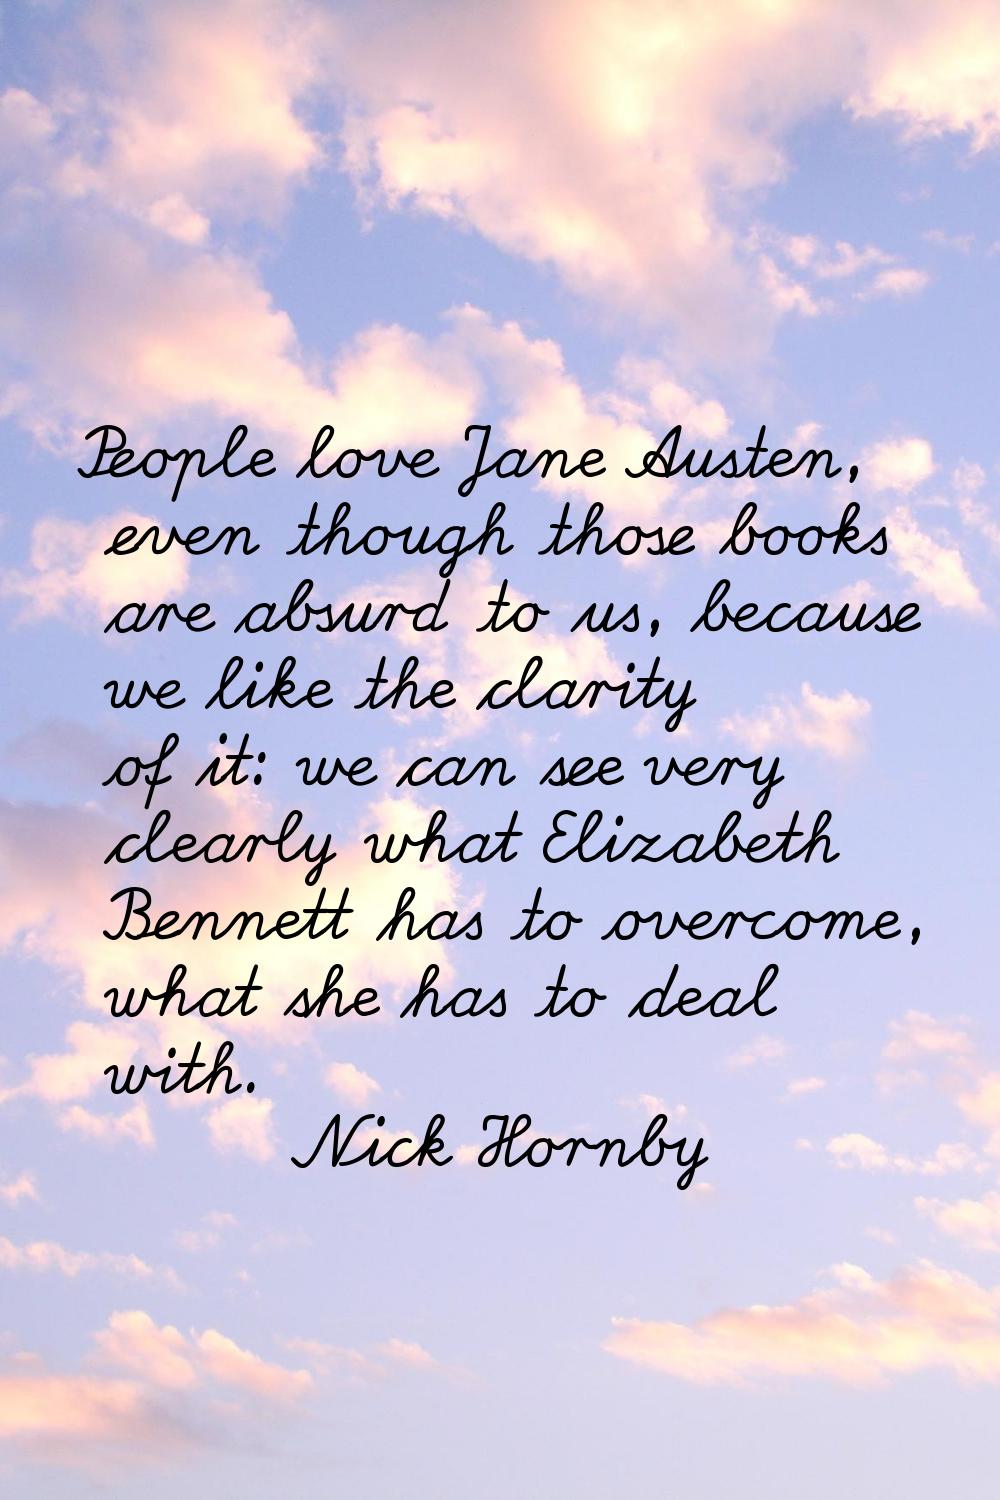 People love Jane Austen, even though those books are absurd to us, because we like the clarity of i